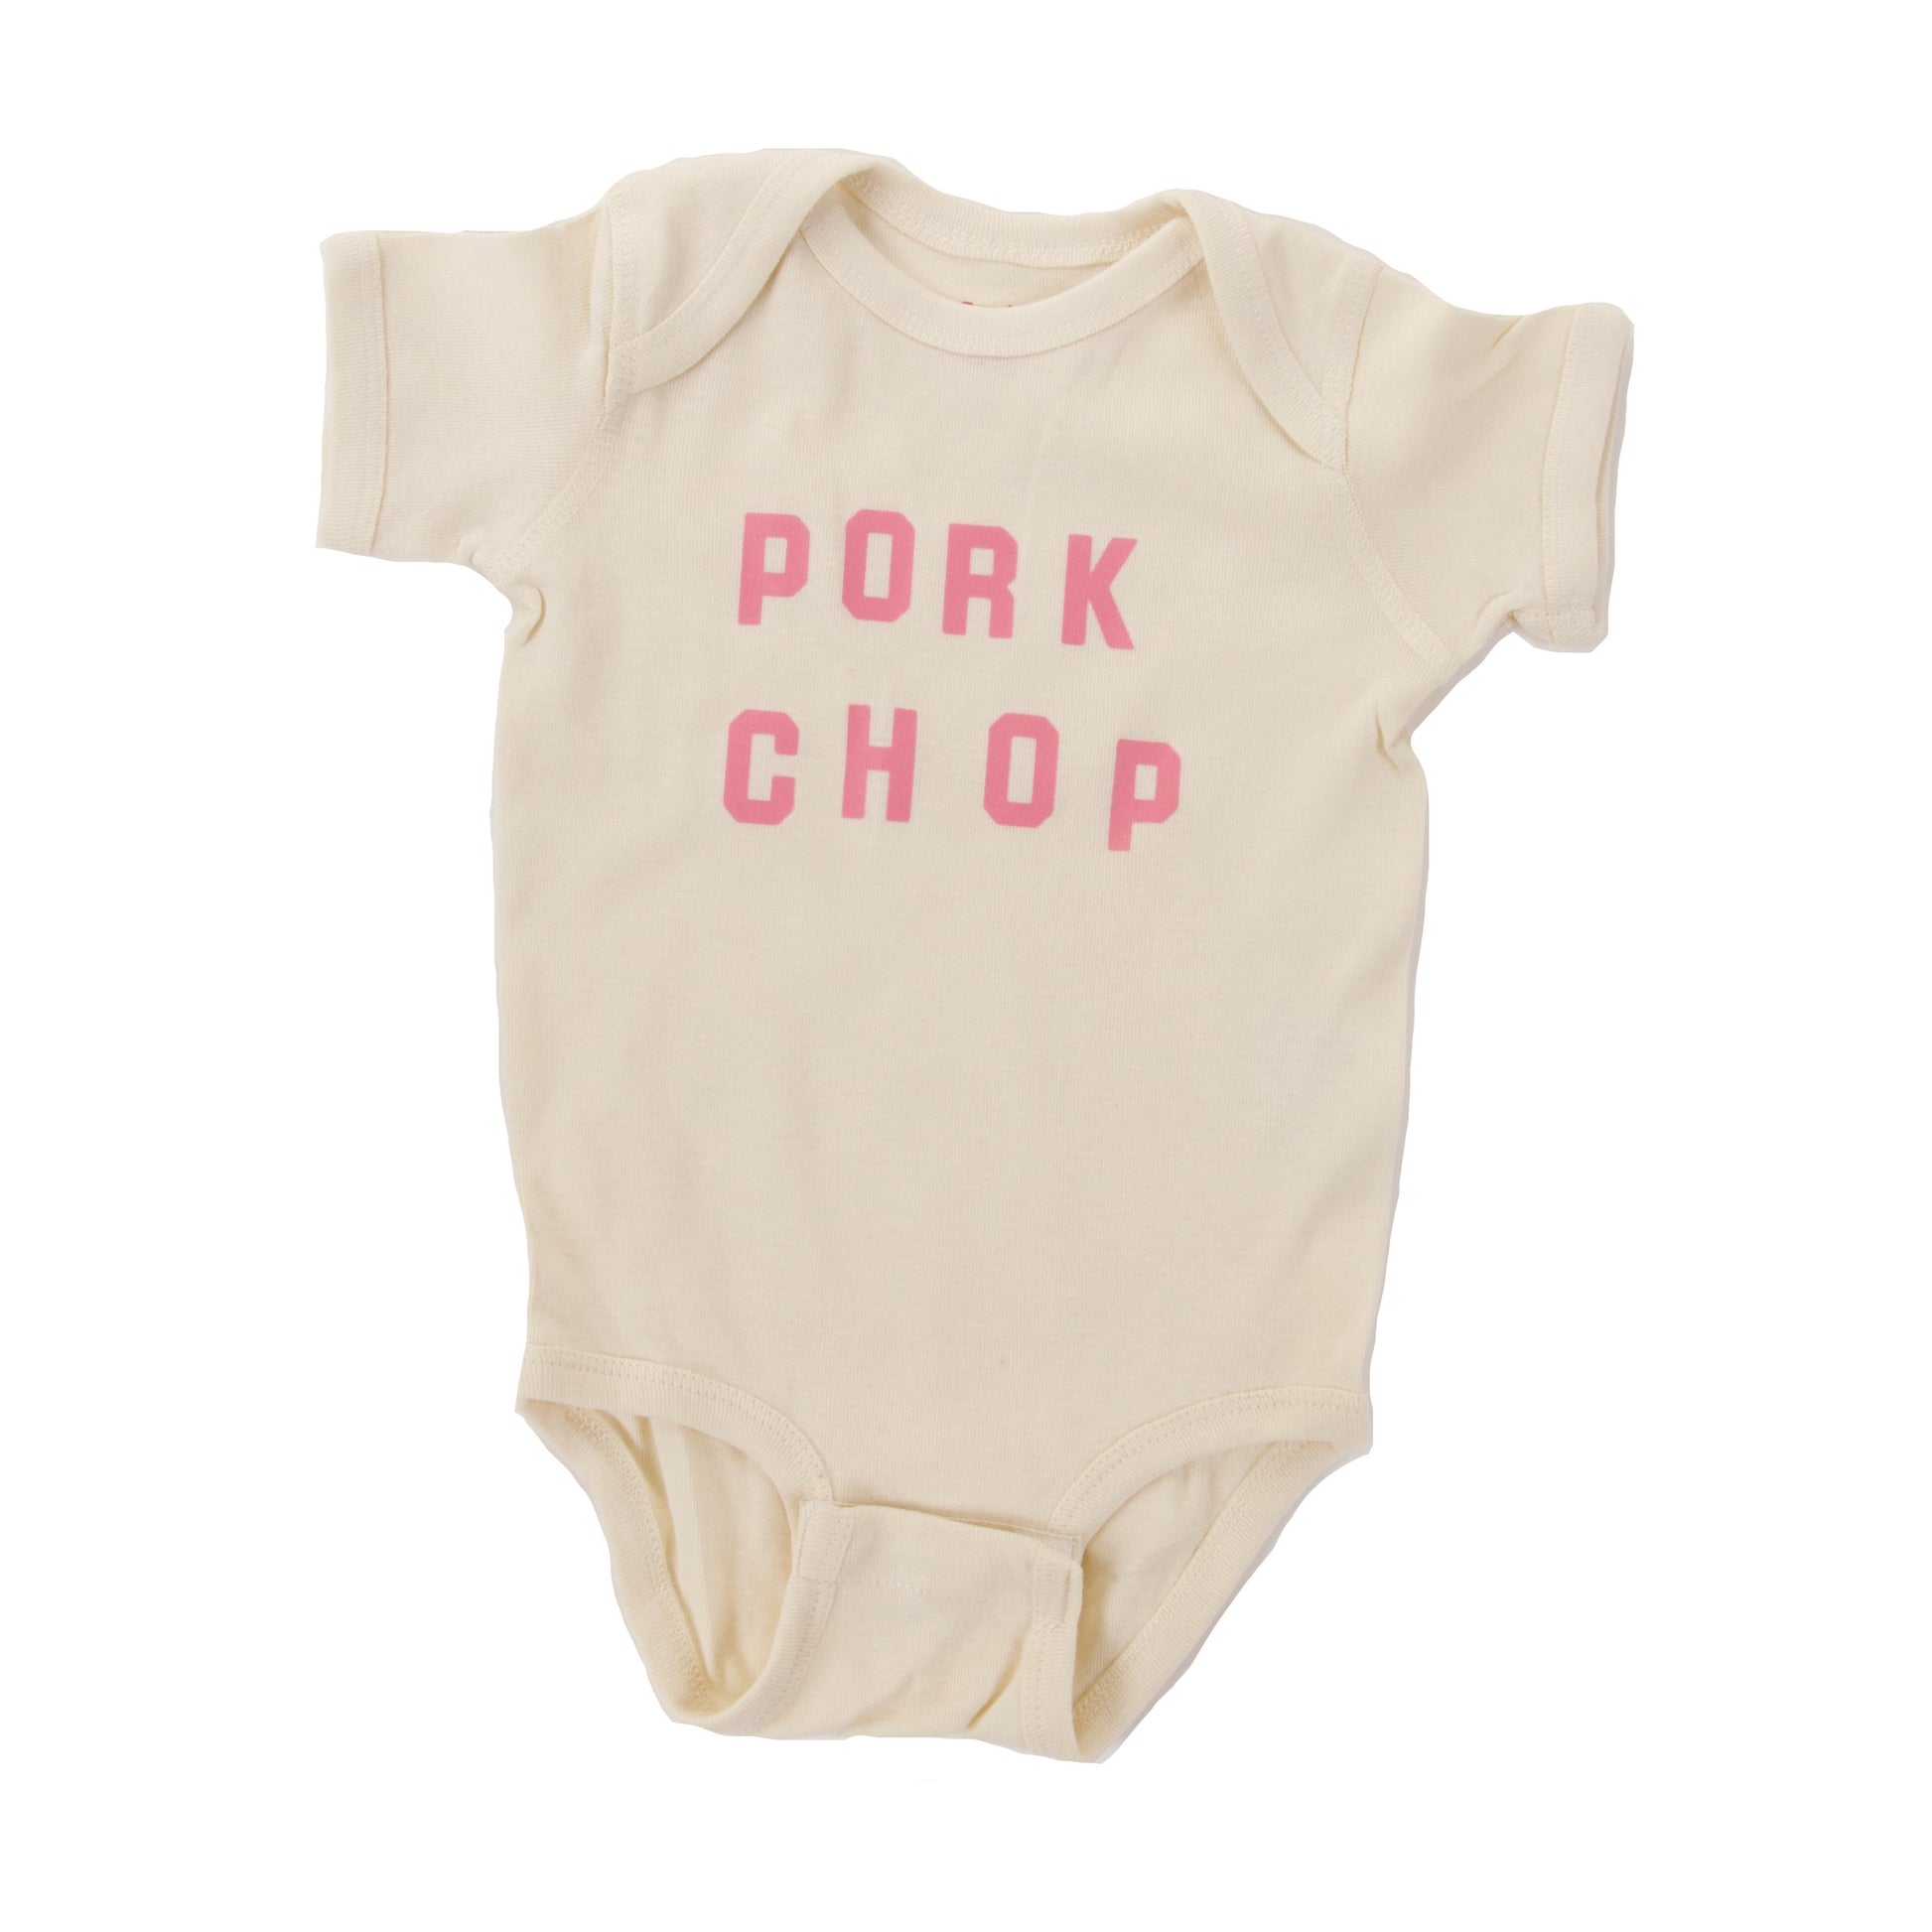 Baby onesie that reads "Pork Chop" in pink. Comes in 3 sizes - 6m, 12m and 18m